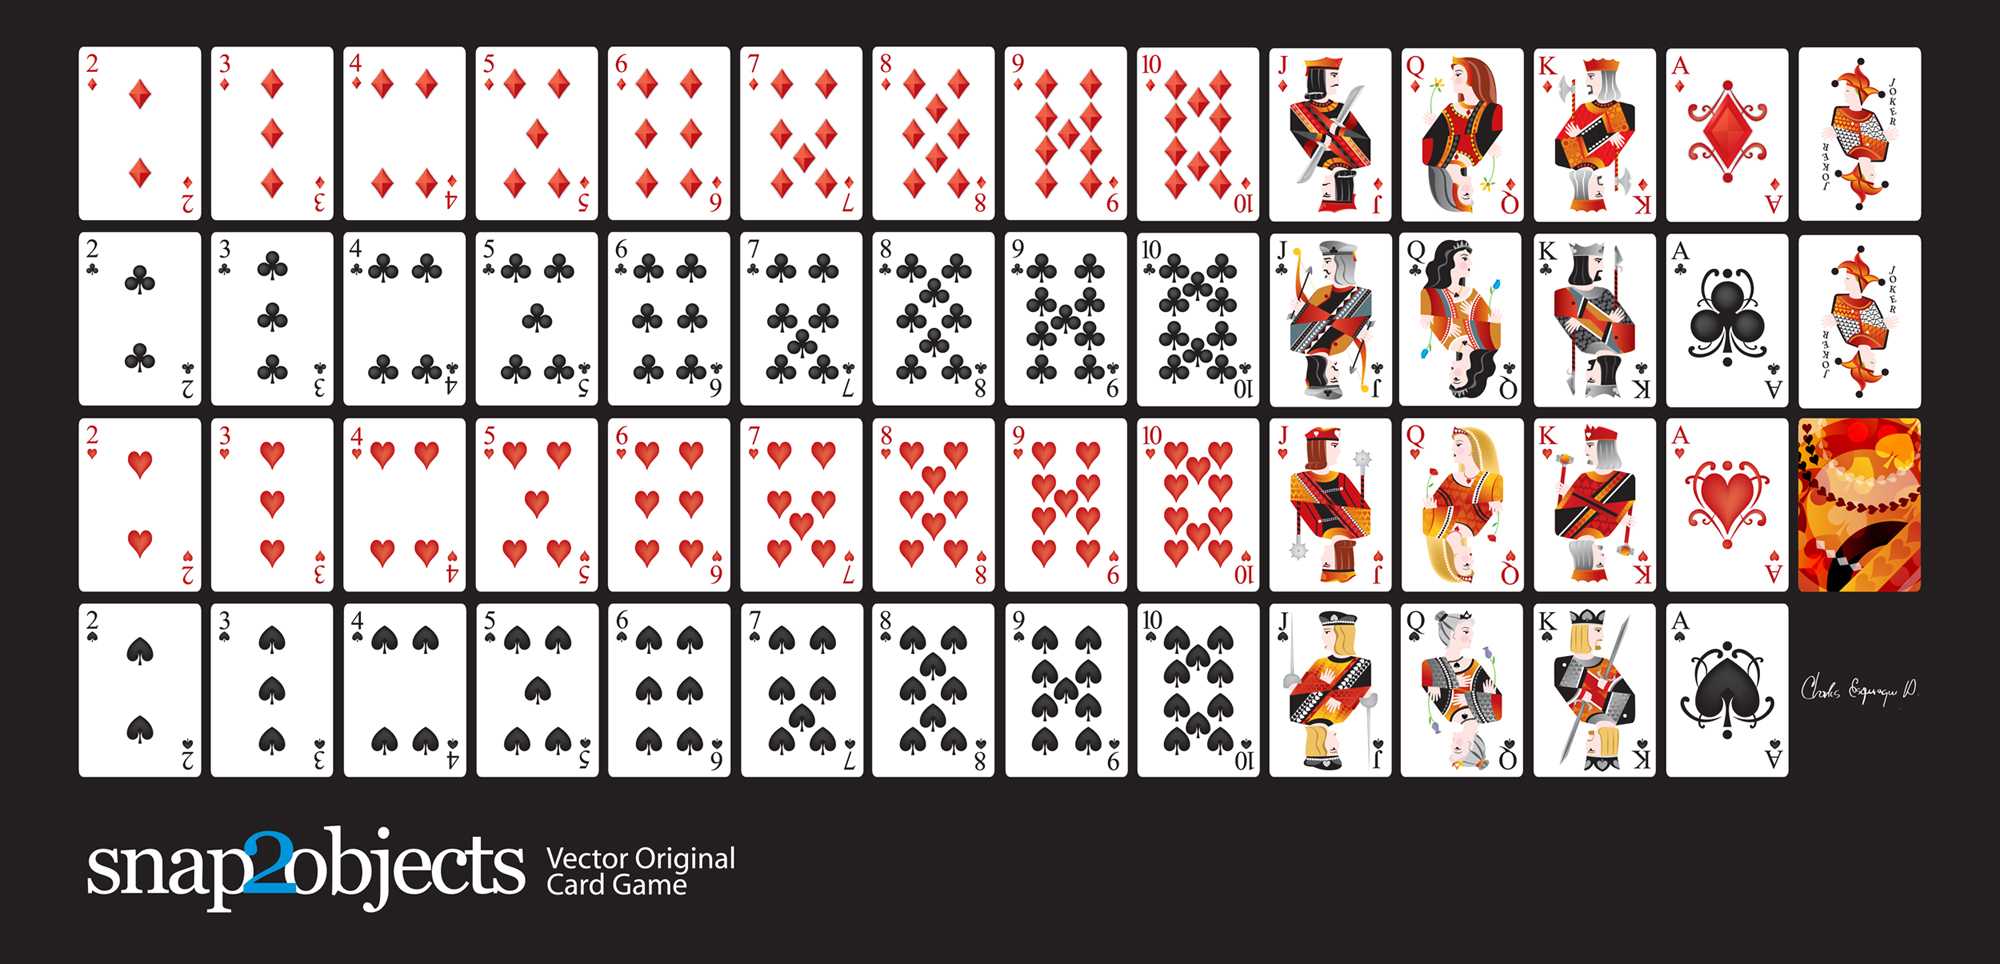 Playing Card Vector Art At Getdrawings | Free Download Inside Playing Card Design Template